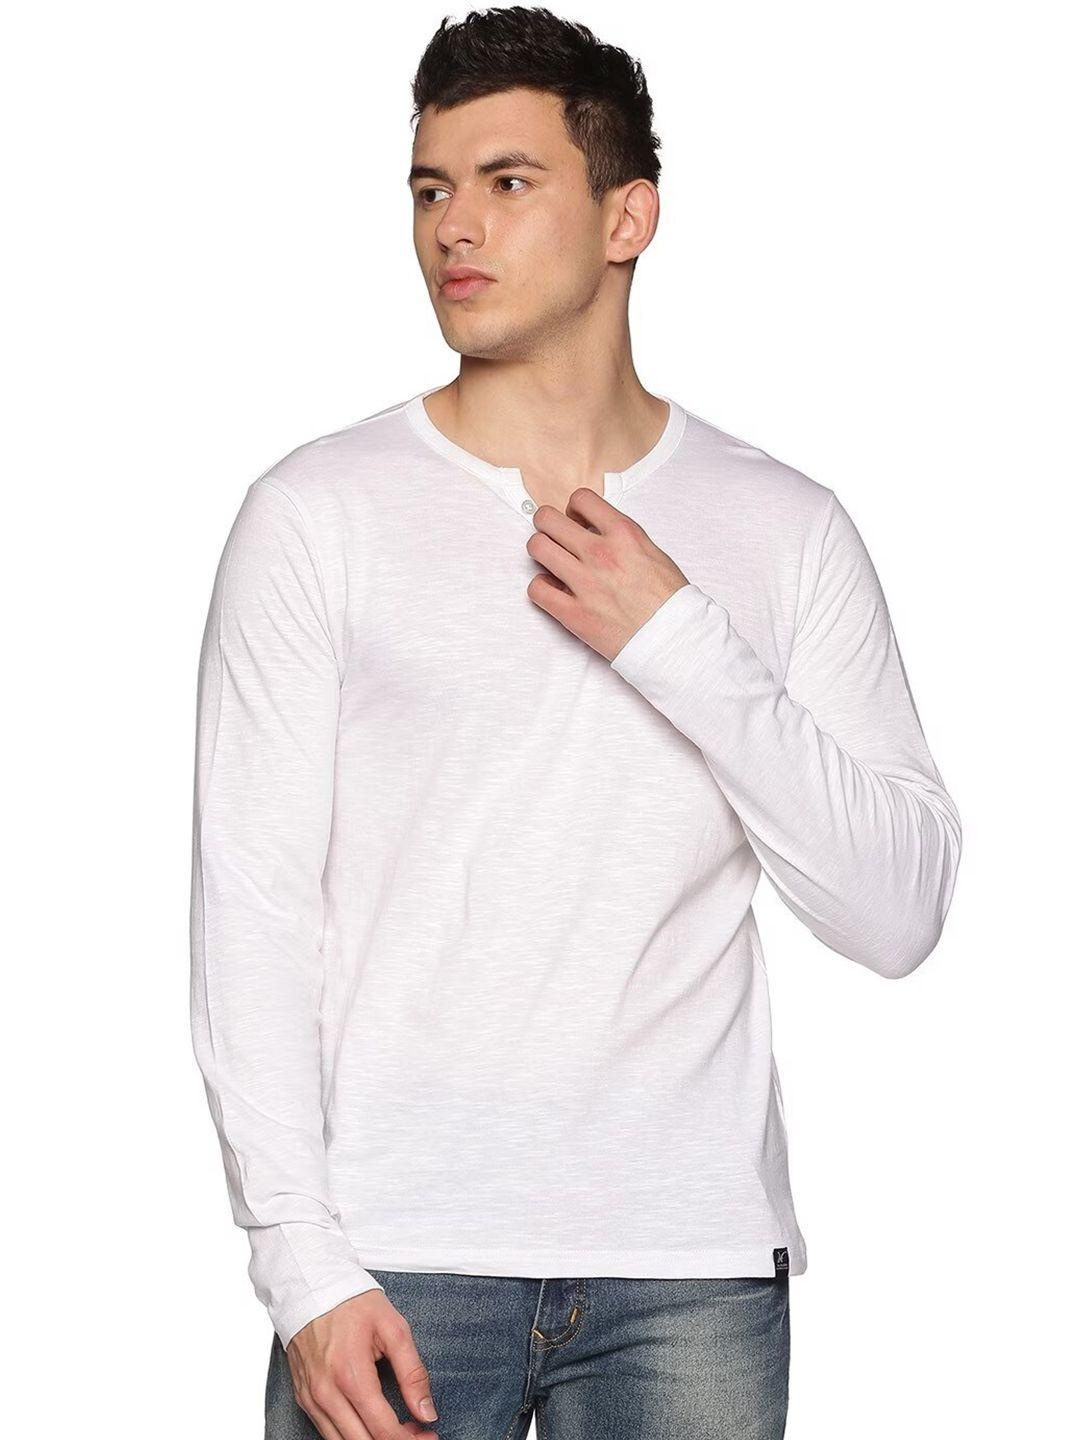 the-hollander-henley-neck-long-sleeves-pure-cotton-t-shirt